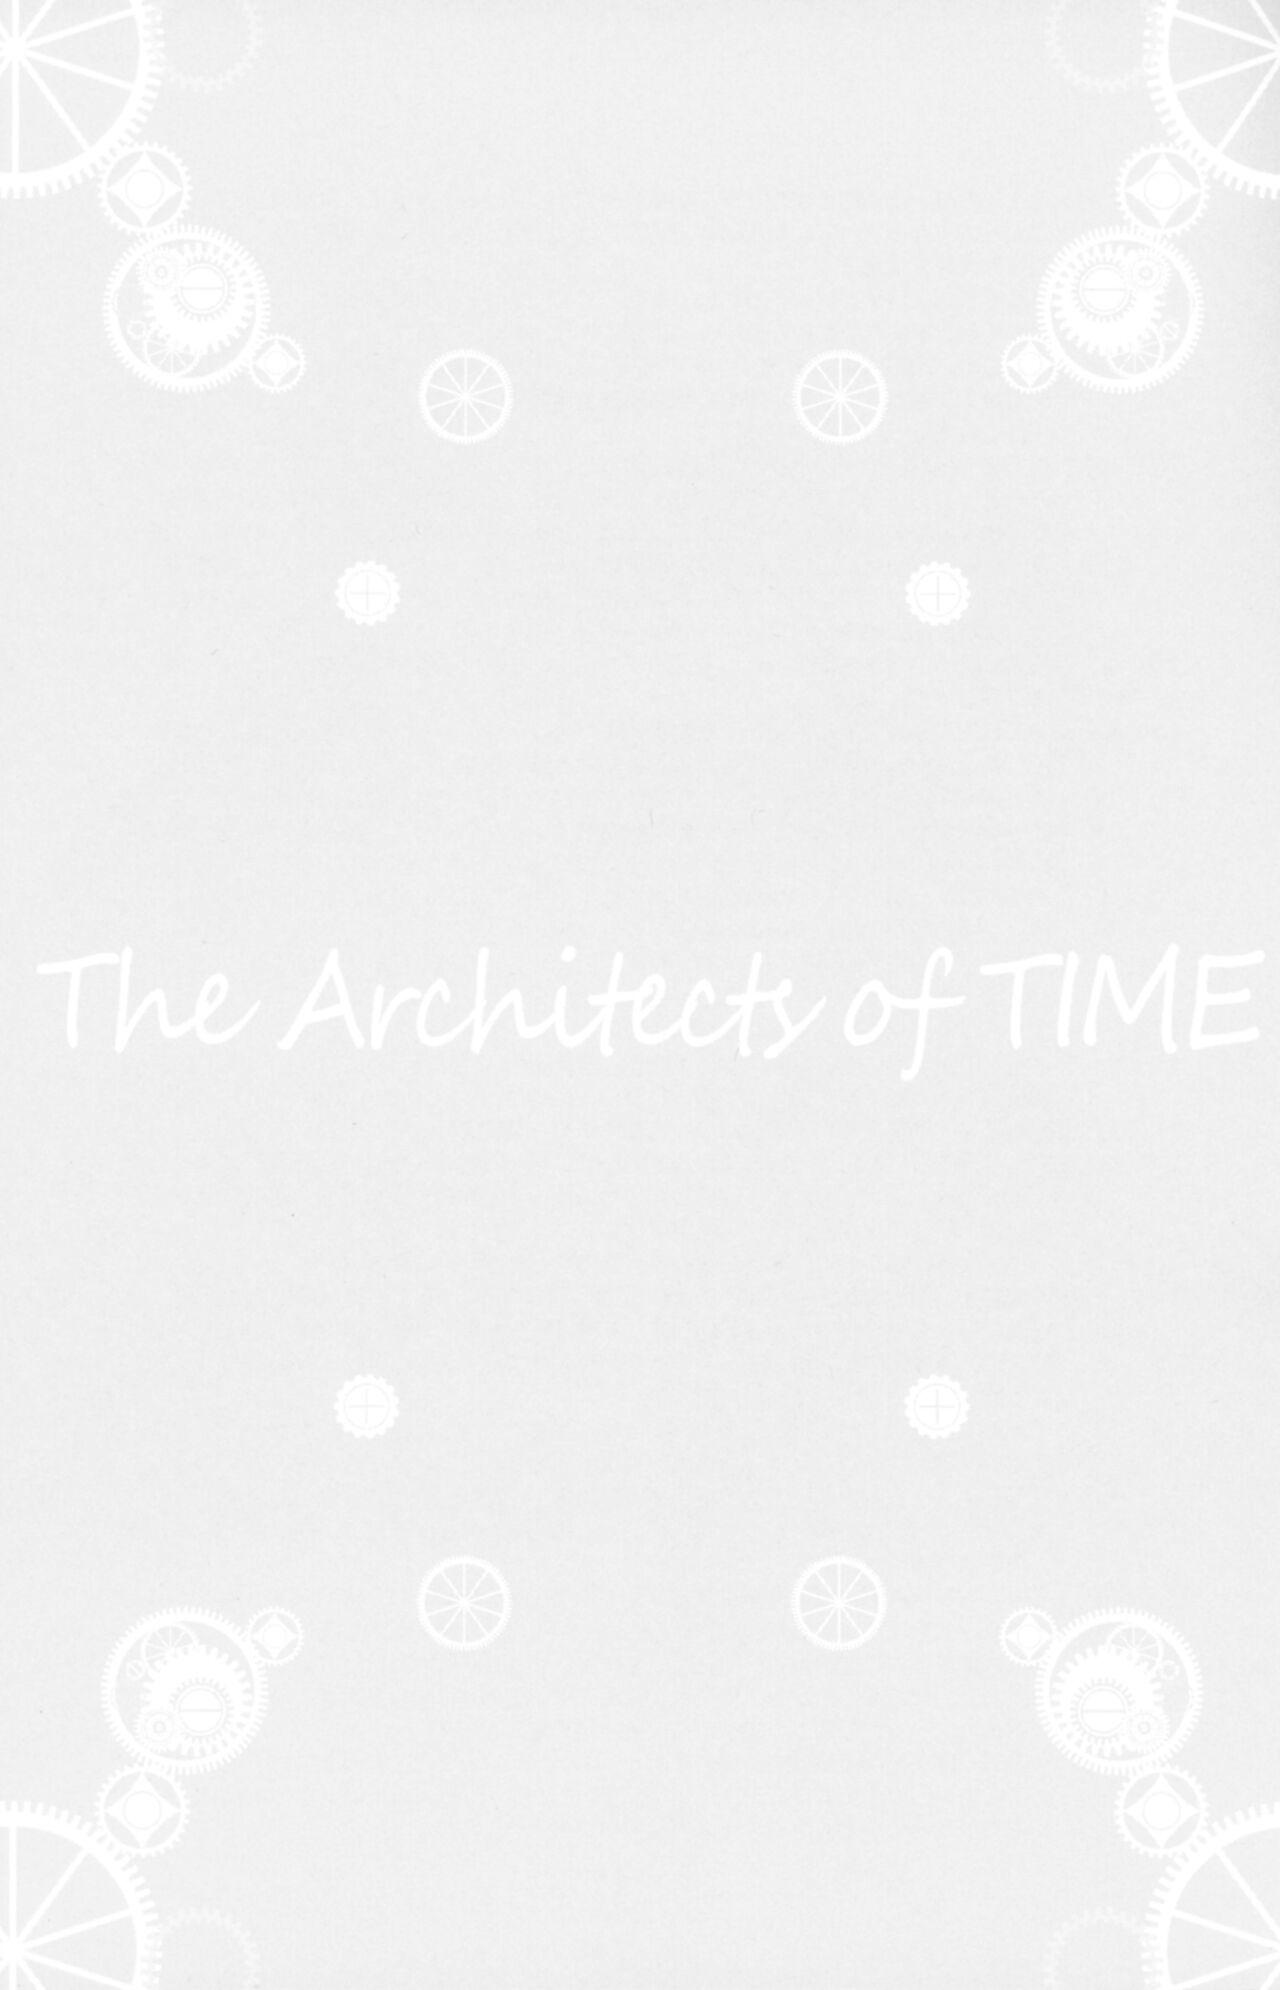 The Architects of TIME 1